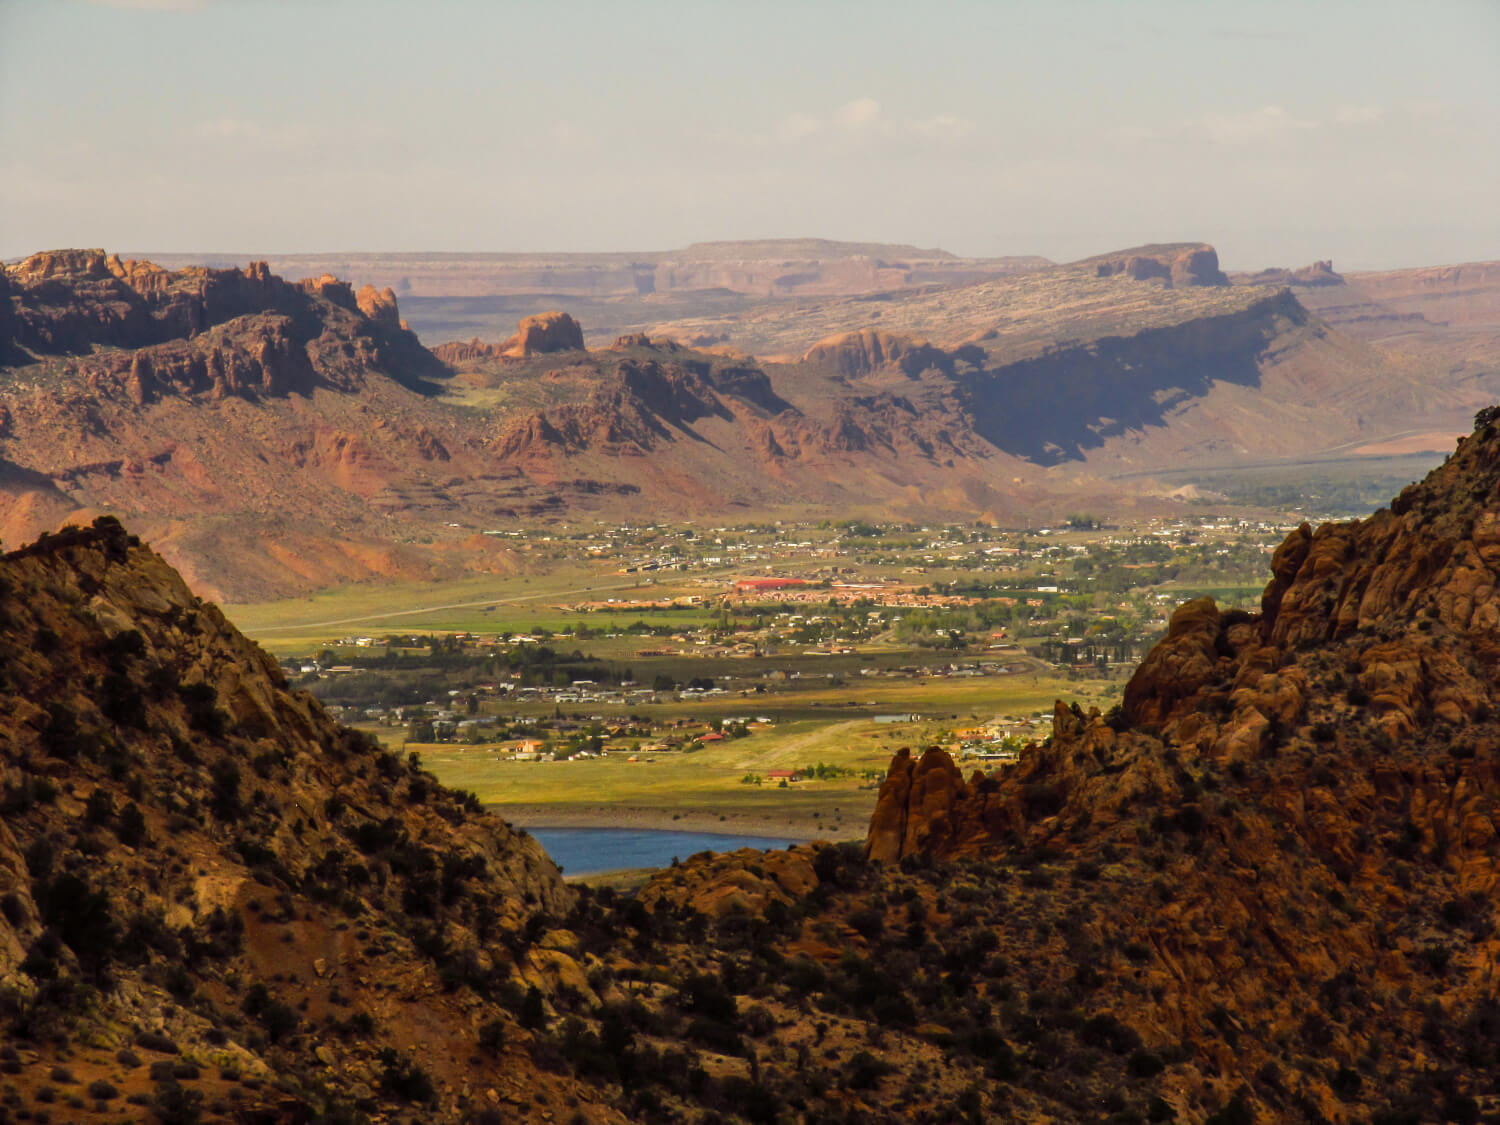 A view of Castle Valley near Moab from La Sal Mountain